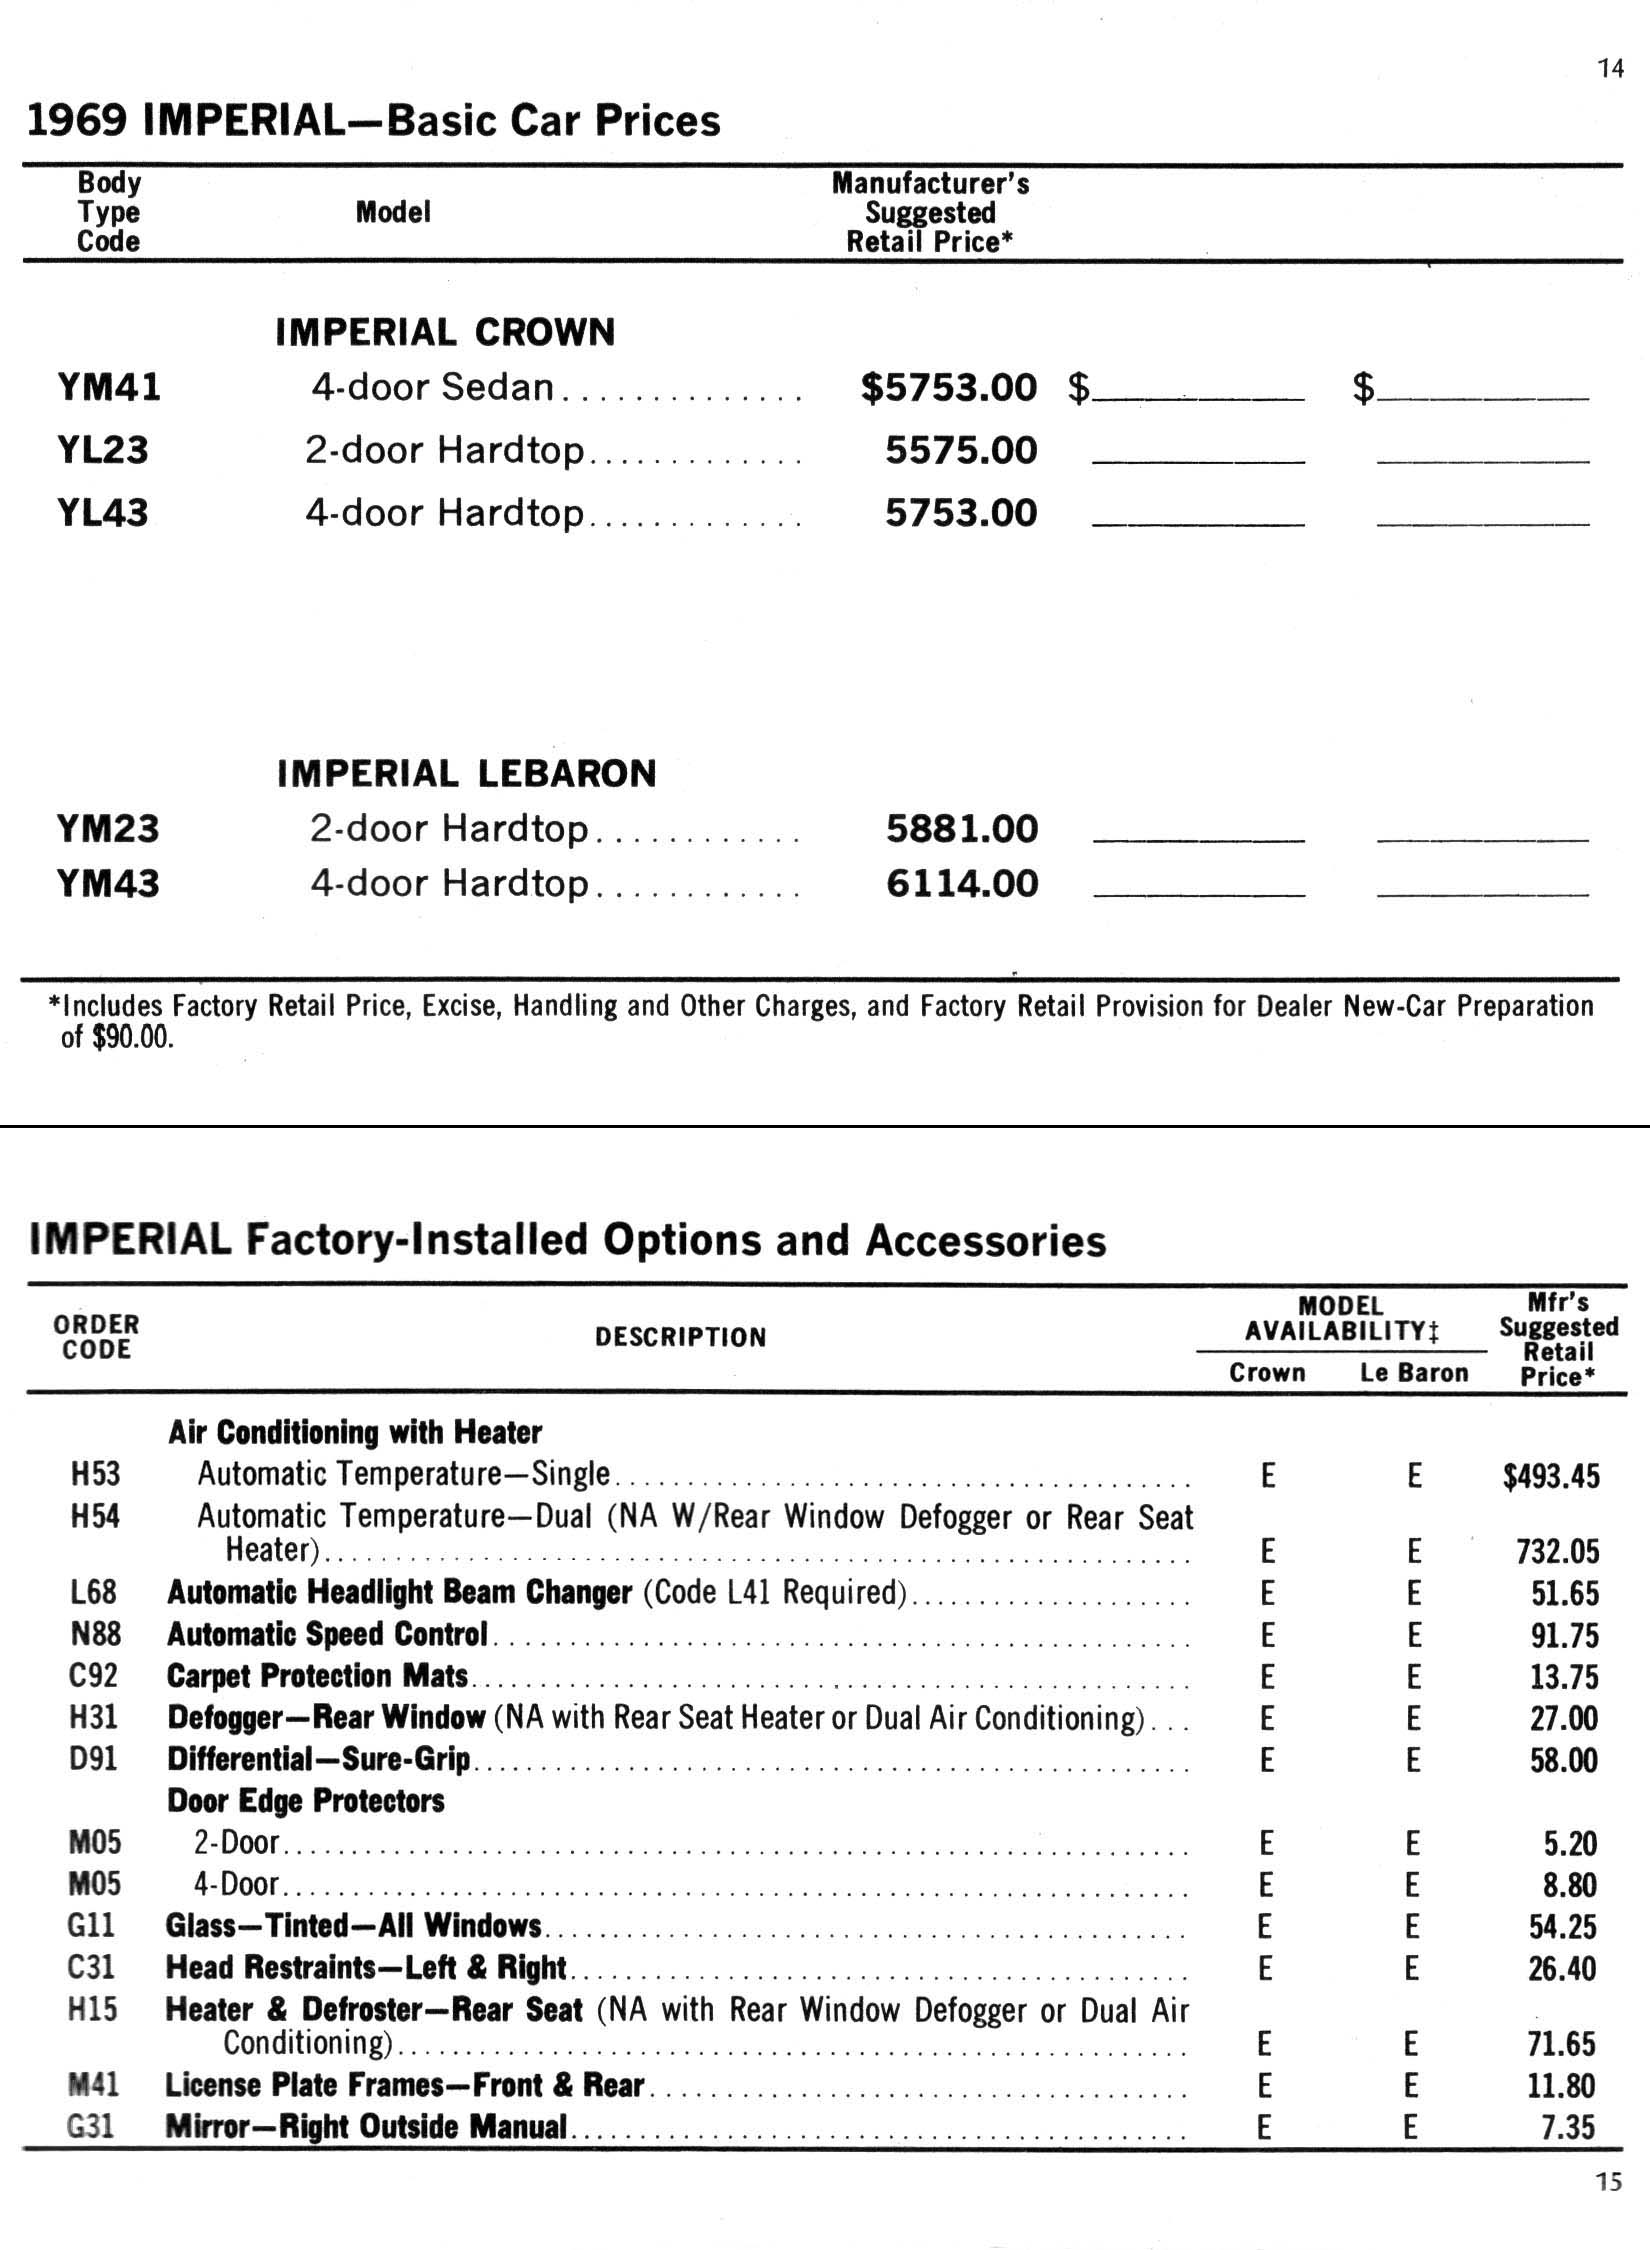 1969 Chrysler Car And Equipment Price List Page 6